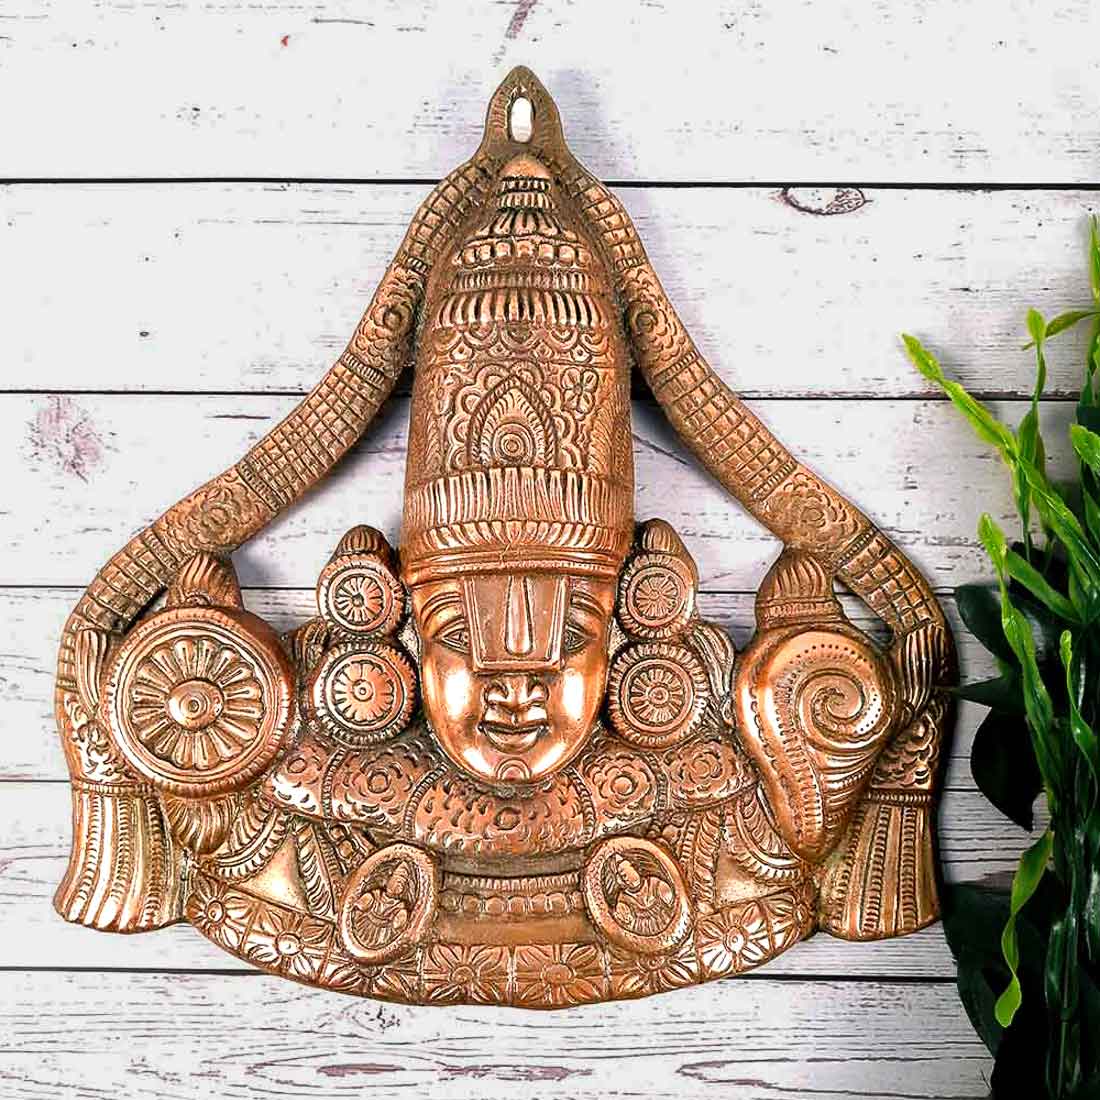 Lord Balaji Wall Hanging Idol | Shri Venkateswara Swami Wall Statue | Tirupati Balaji Wall Hanging Murti - for Home, Living Room, Office, Puja & Gift - 14 Inch